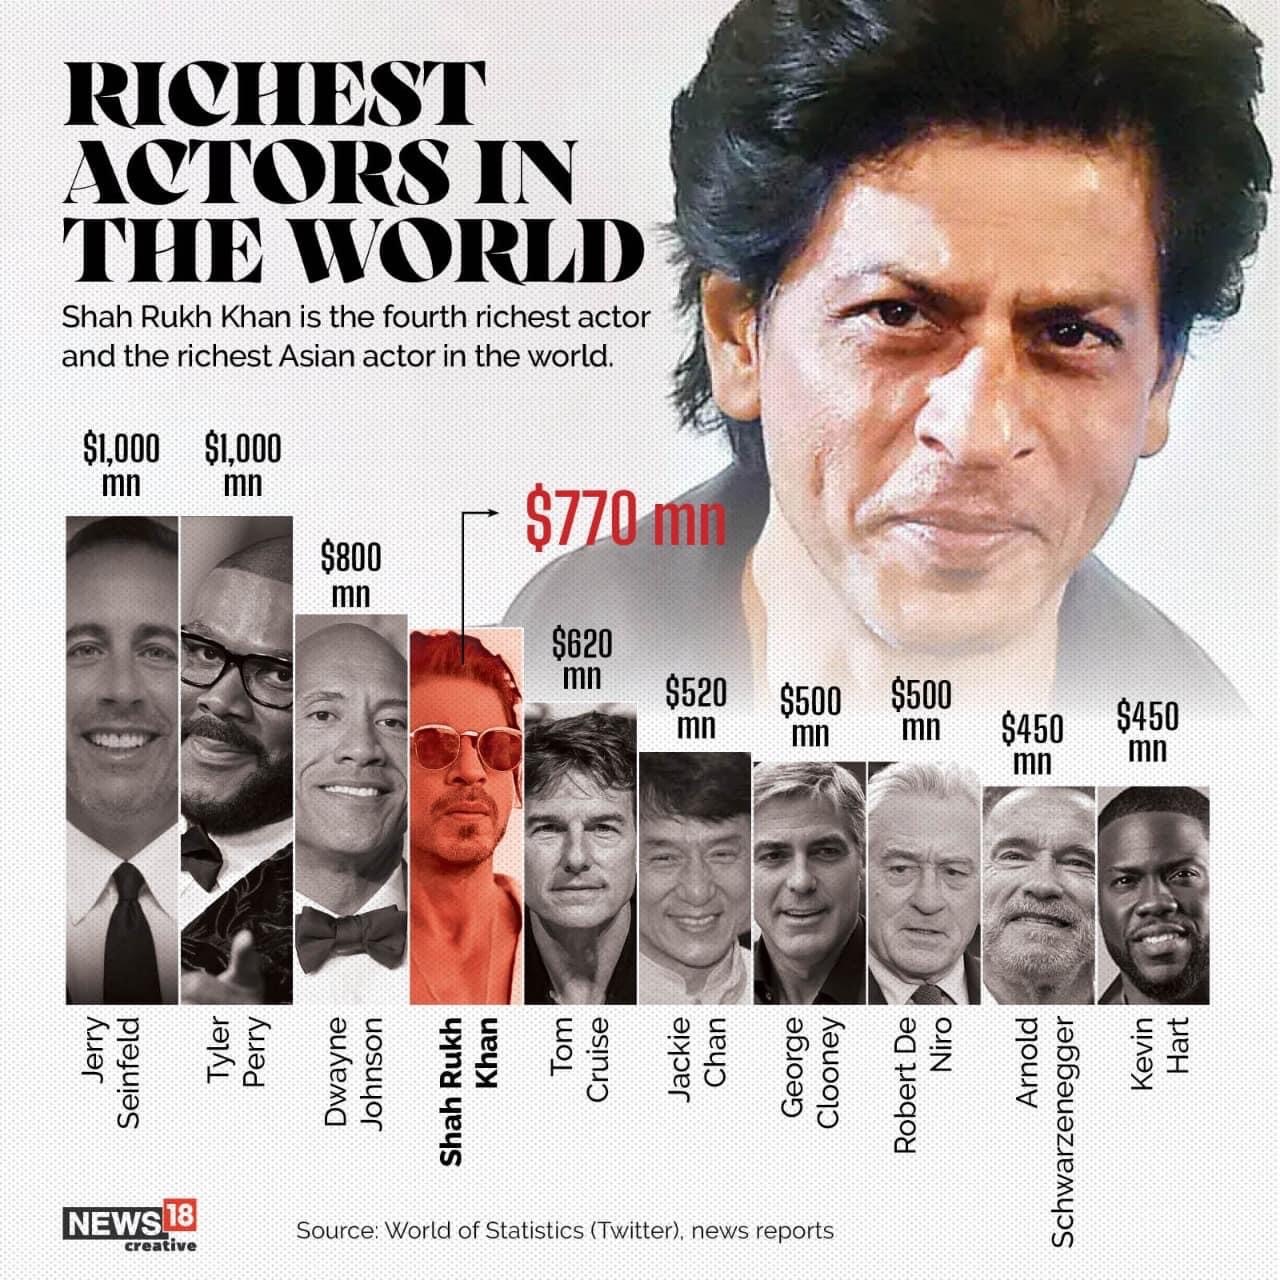 Shah Rukh Khan 4th Richest Actor In The World With Over $700 Million Worth